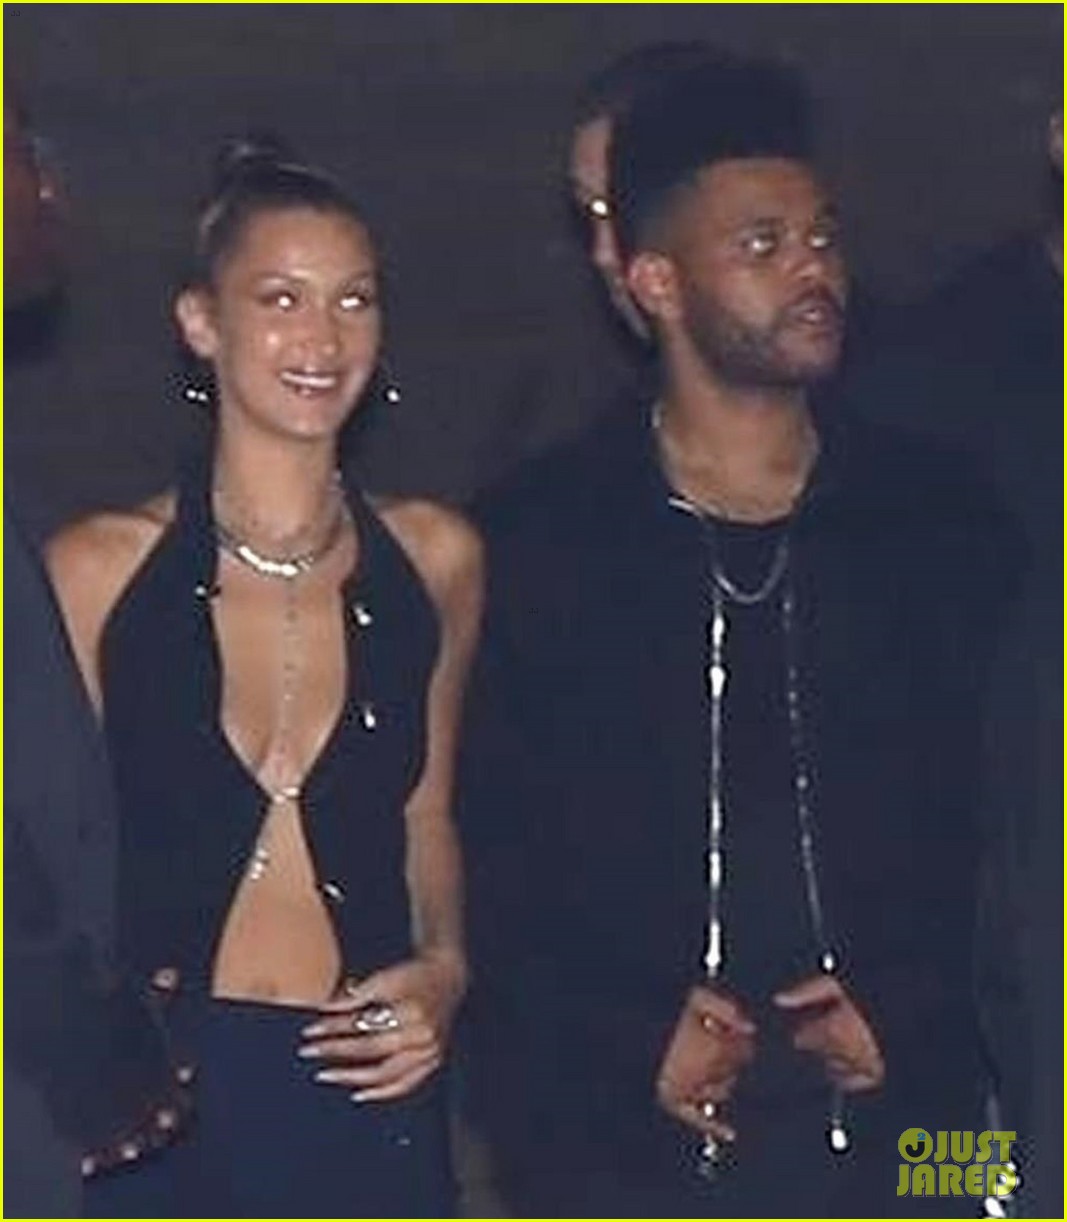 bella hadid and the weeknd party at kylie jenners 21st bithday bash2 03